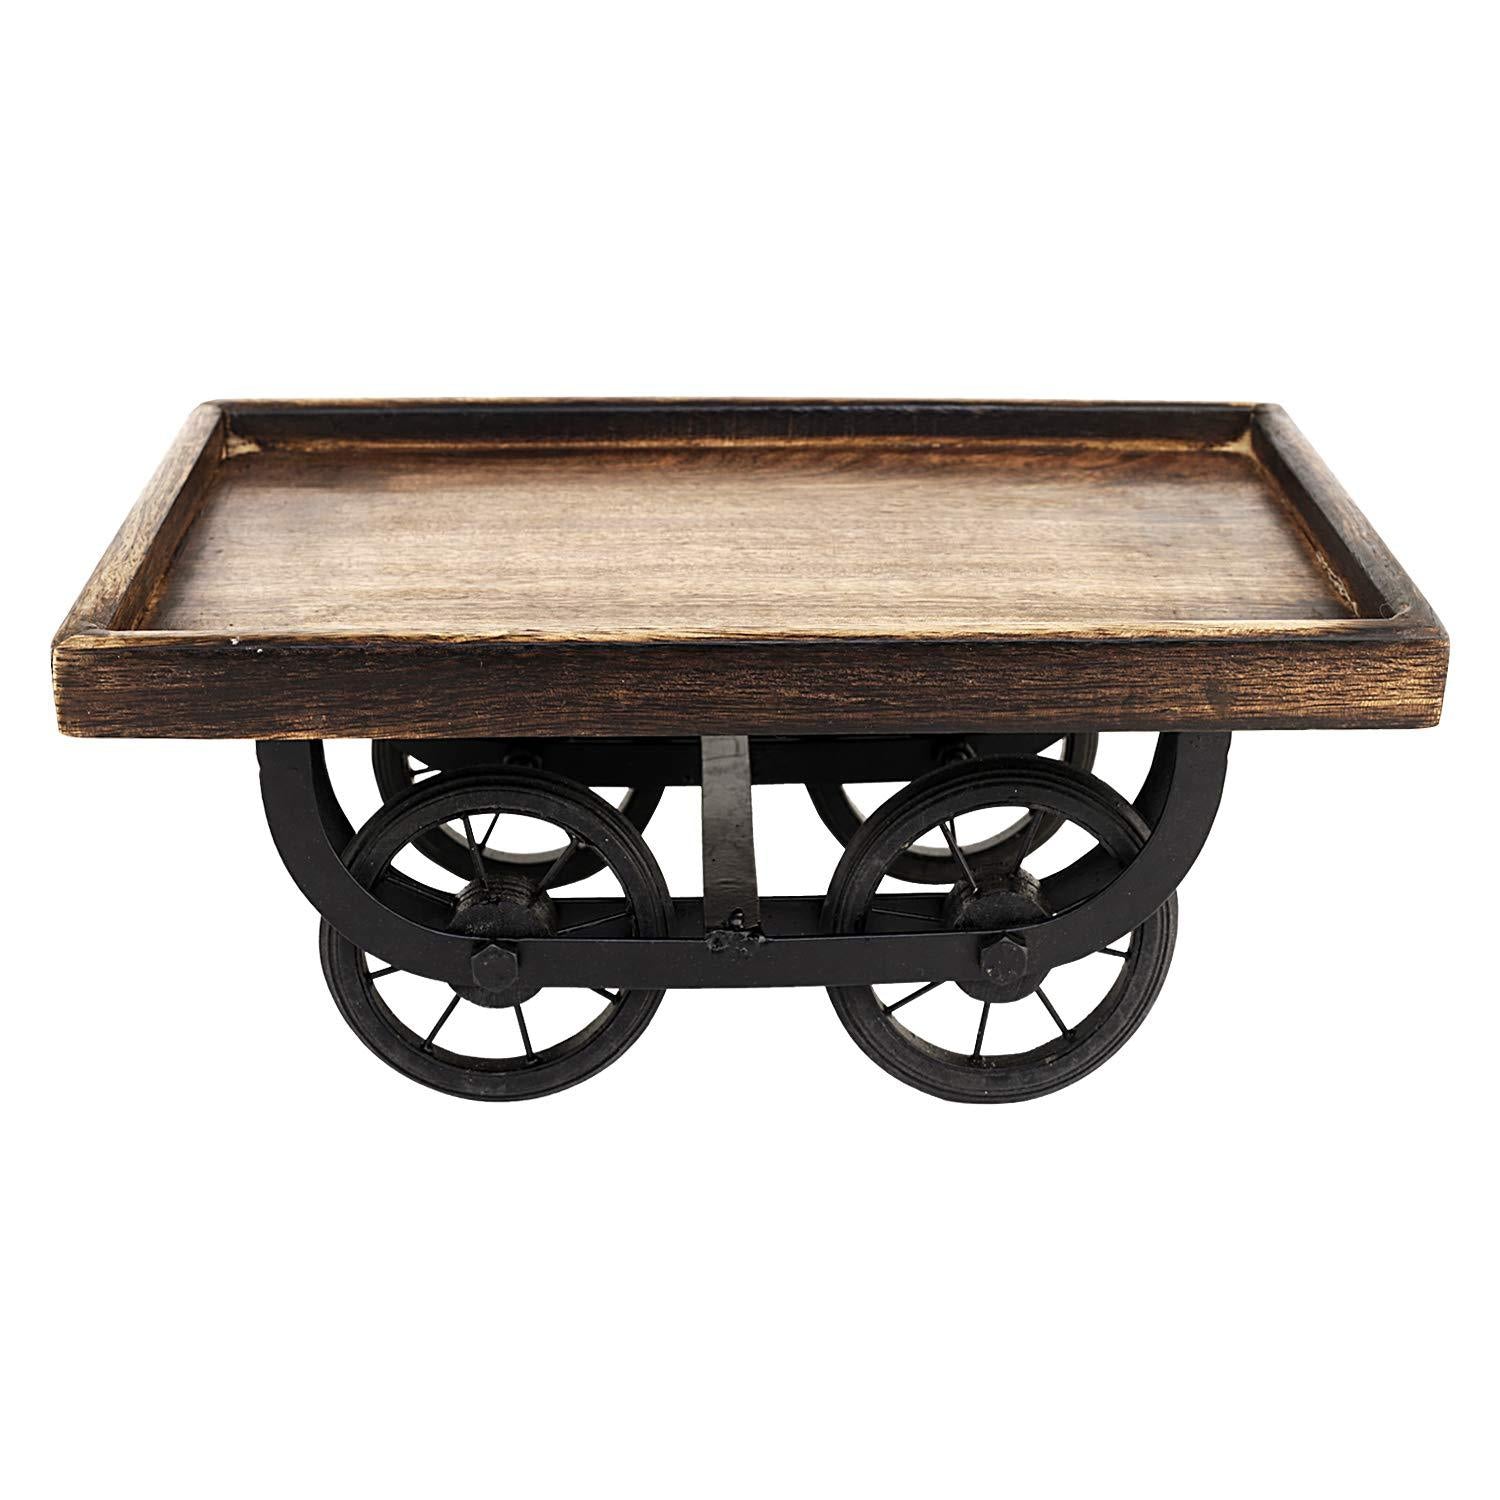 Wooden Snack Serving Platter for Dining Table